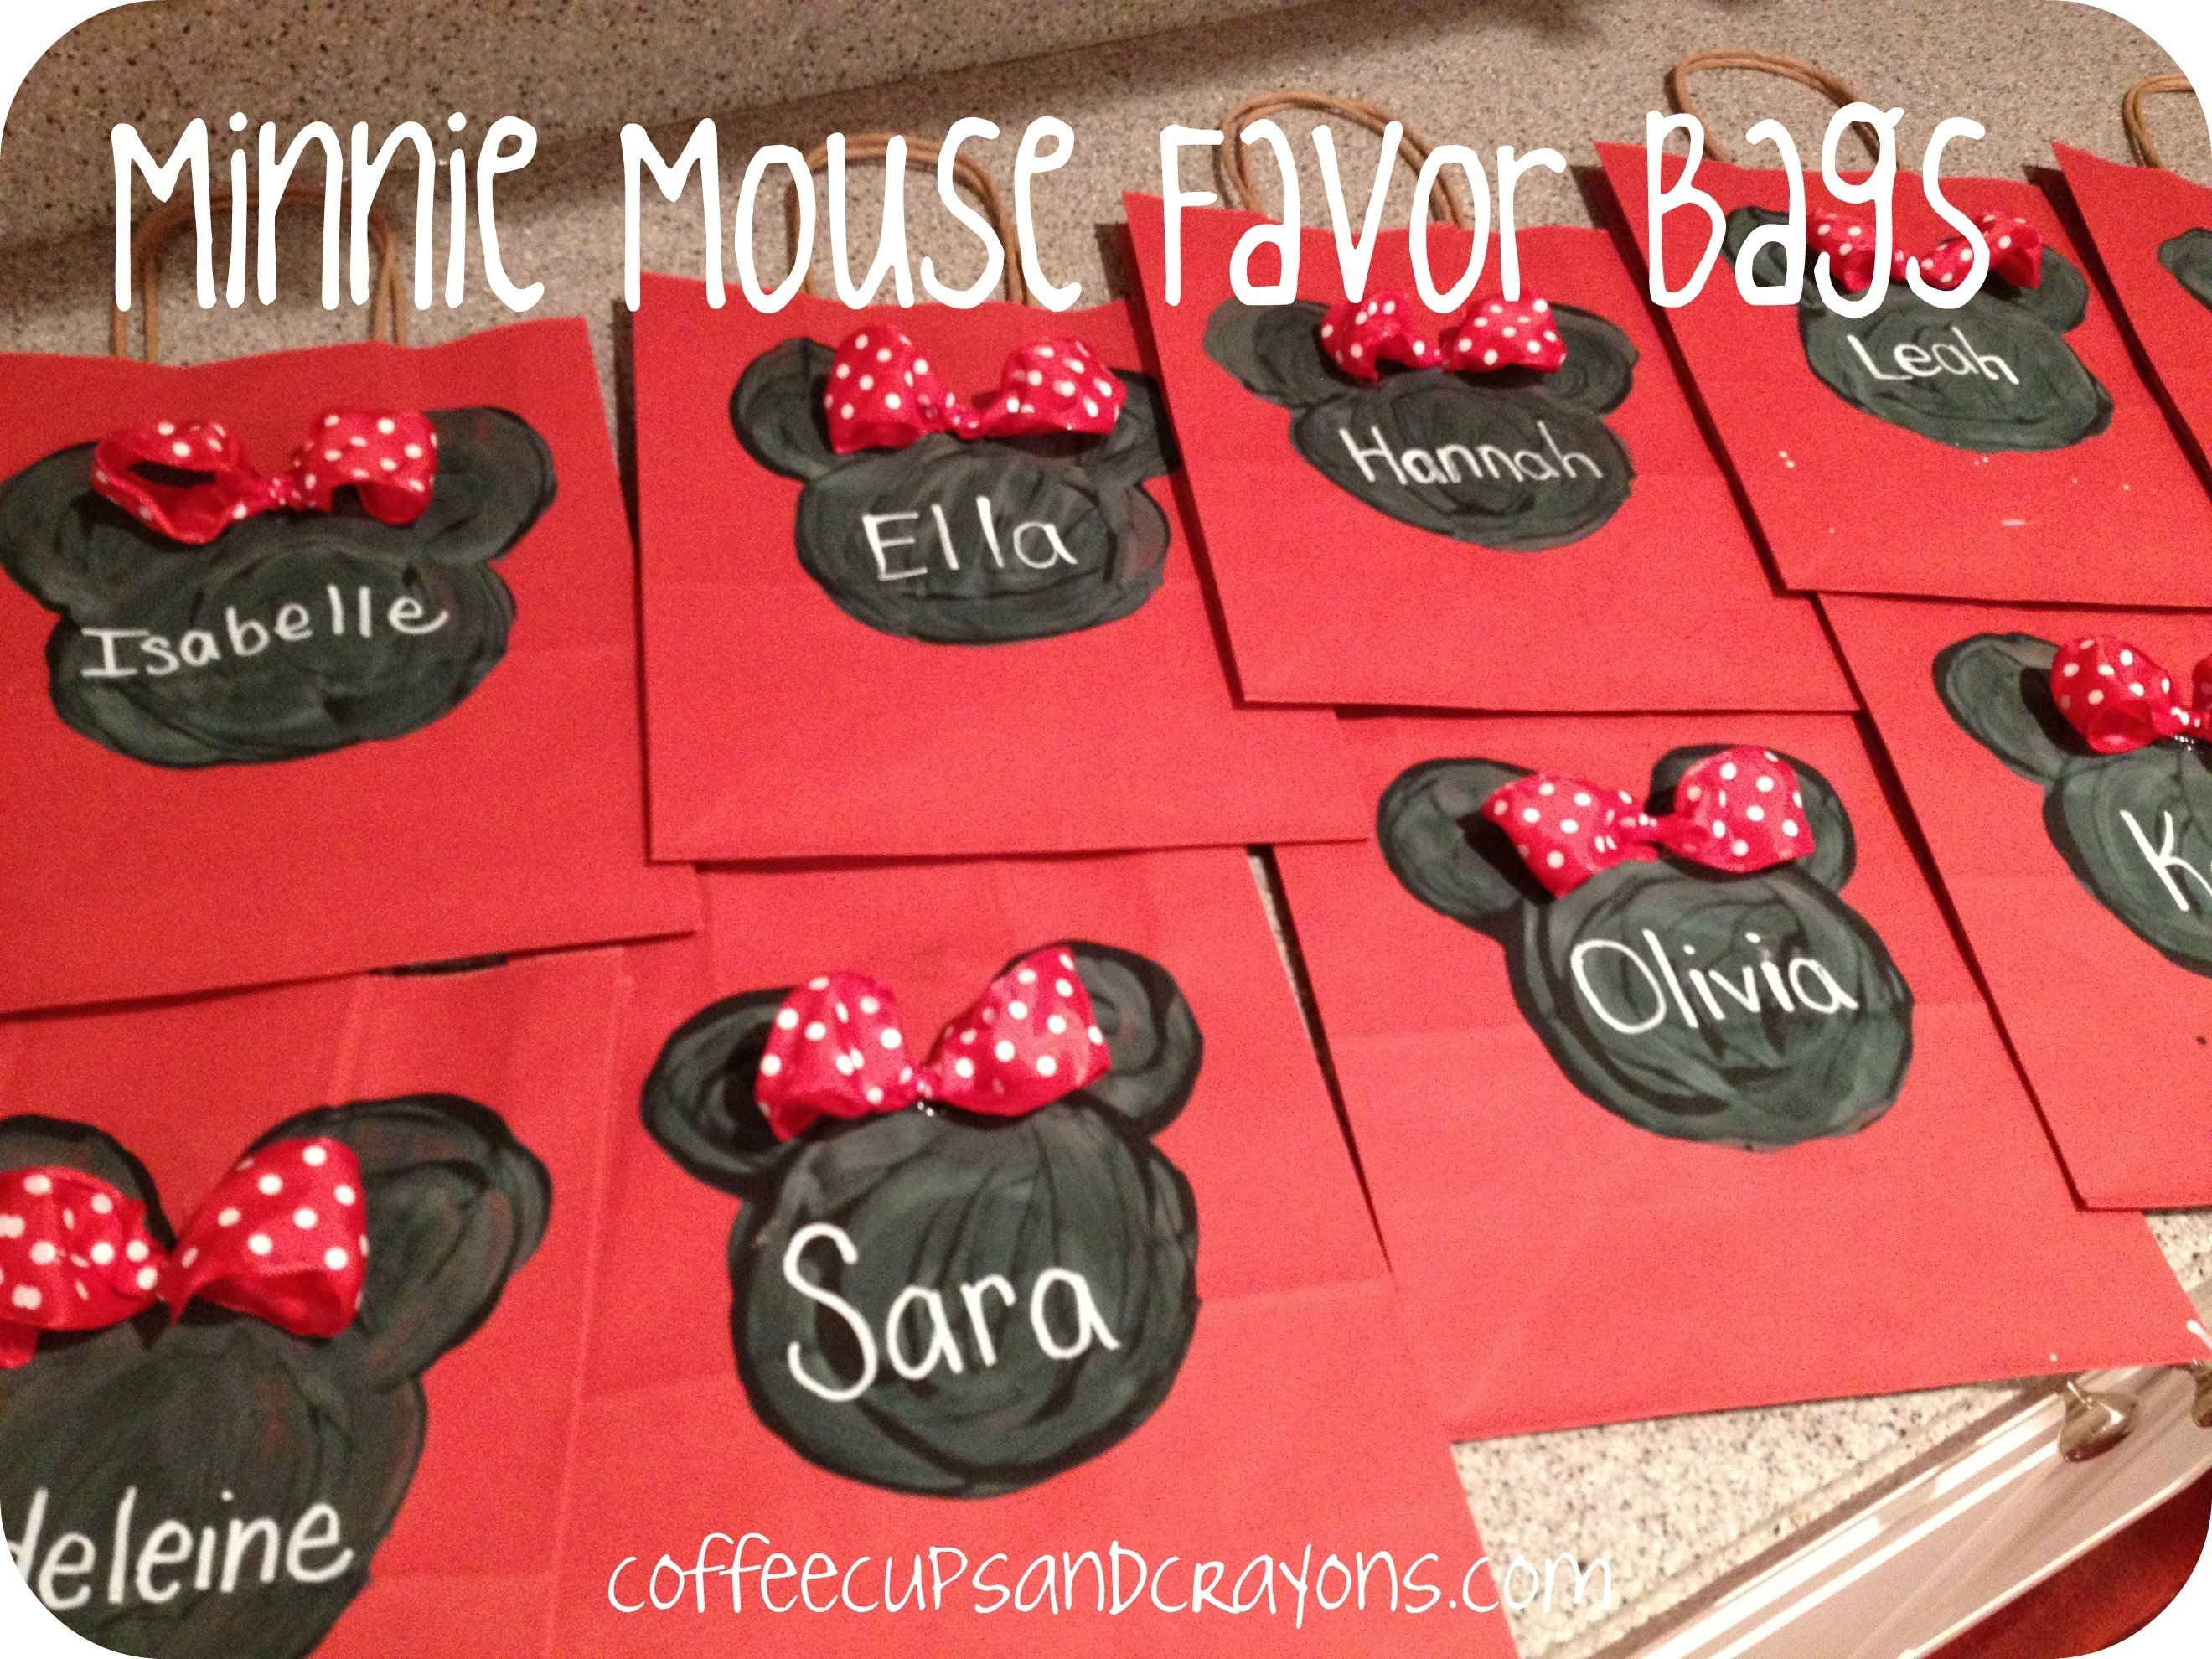 10 Gorgeous Minnie Mouse Goody Bags Ideas minnie and mickey favor bags and mouse ears coffee cups and crayons 1 2022